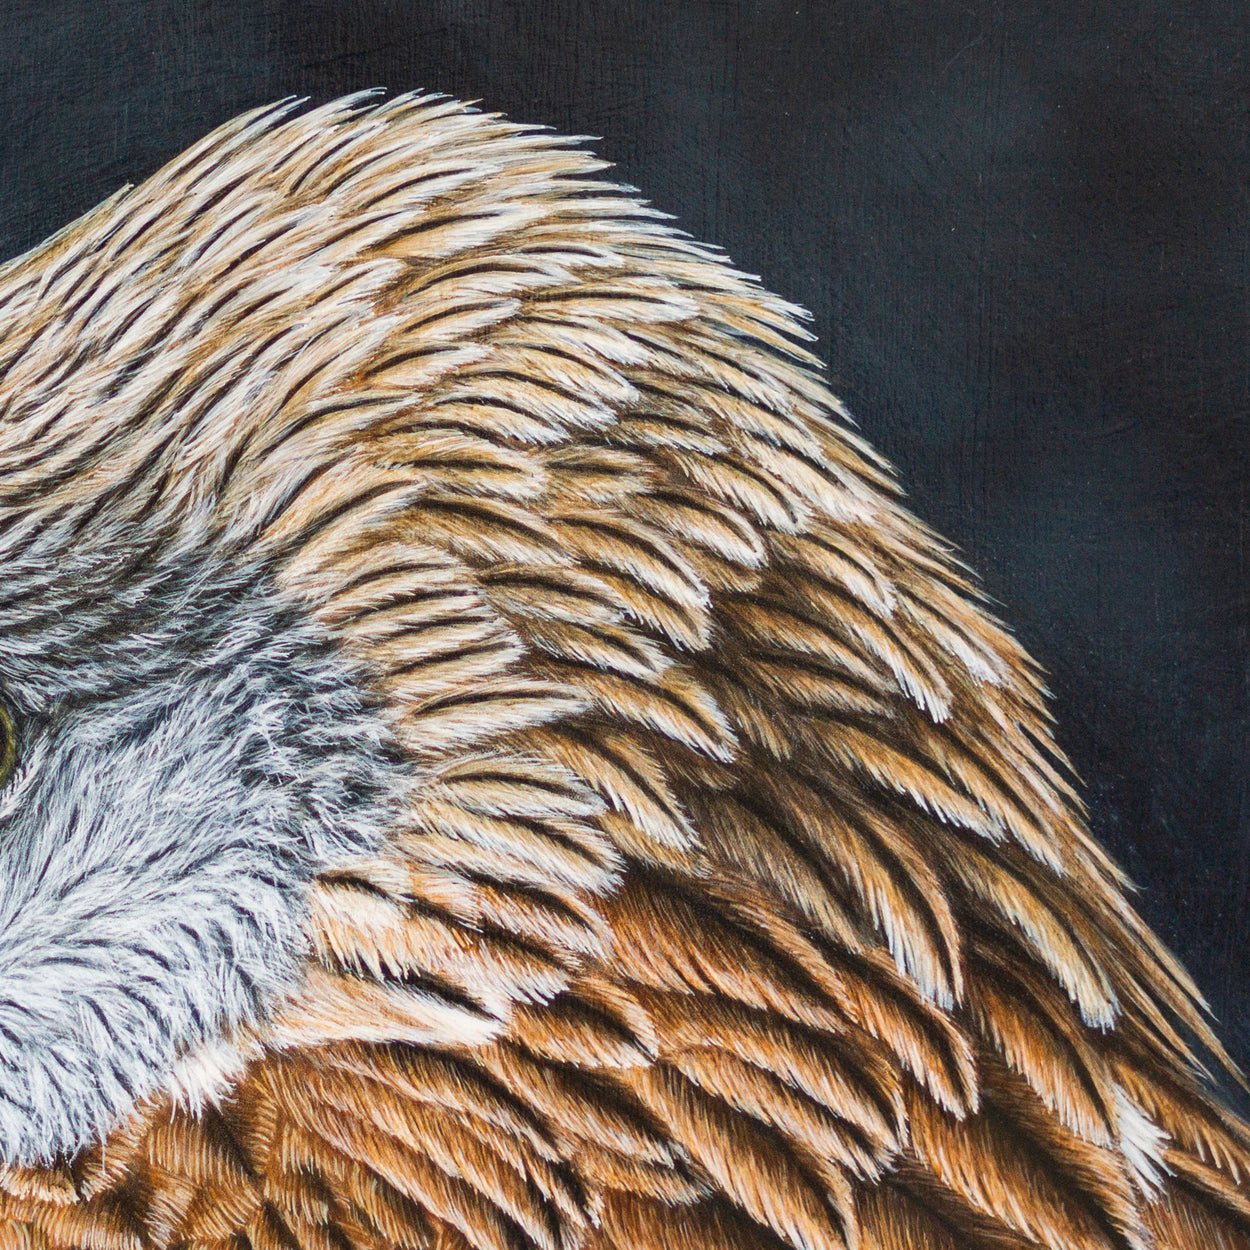 Red Kite Painting Close-up 3 - Jill Dimond